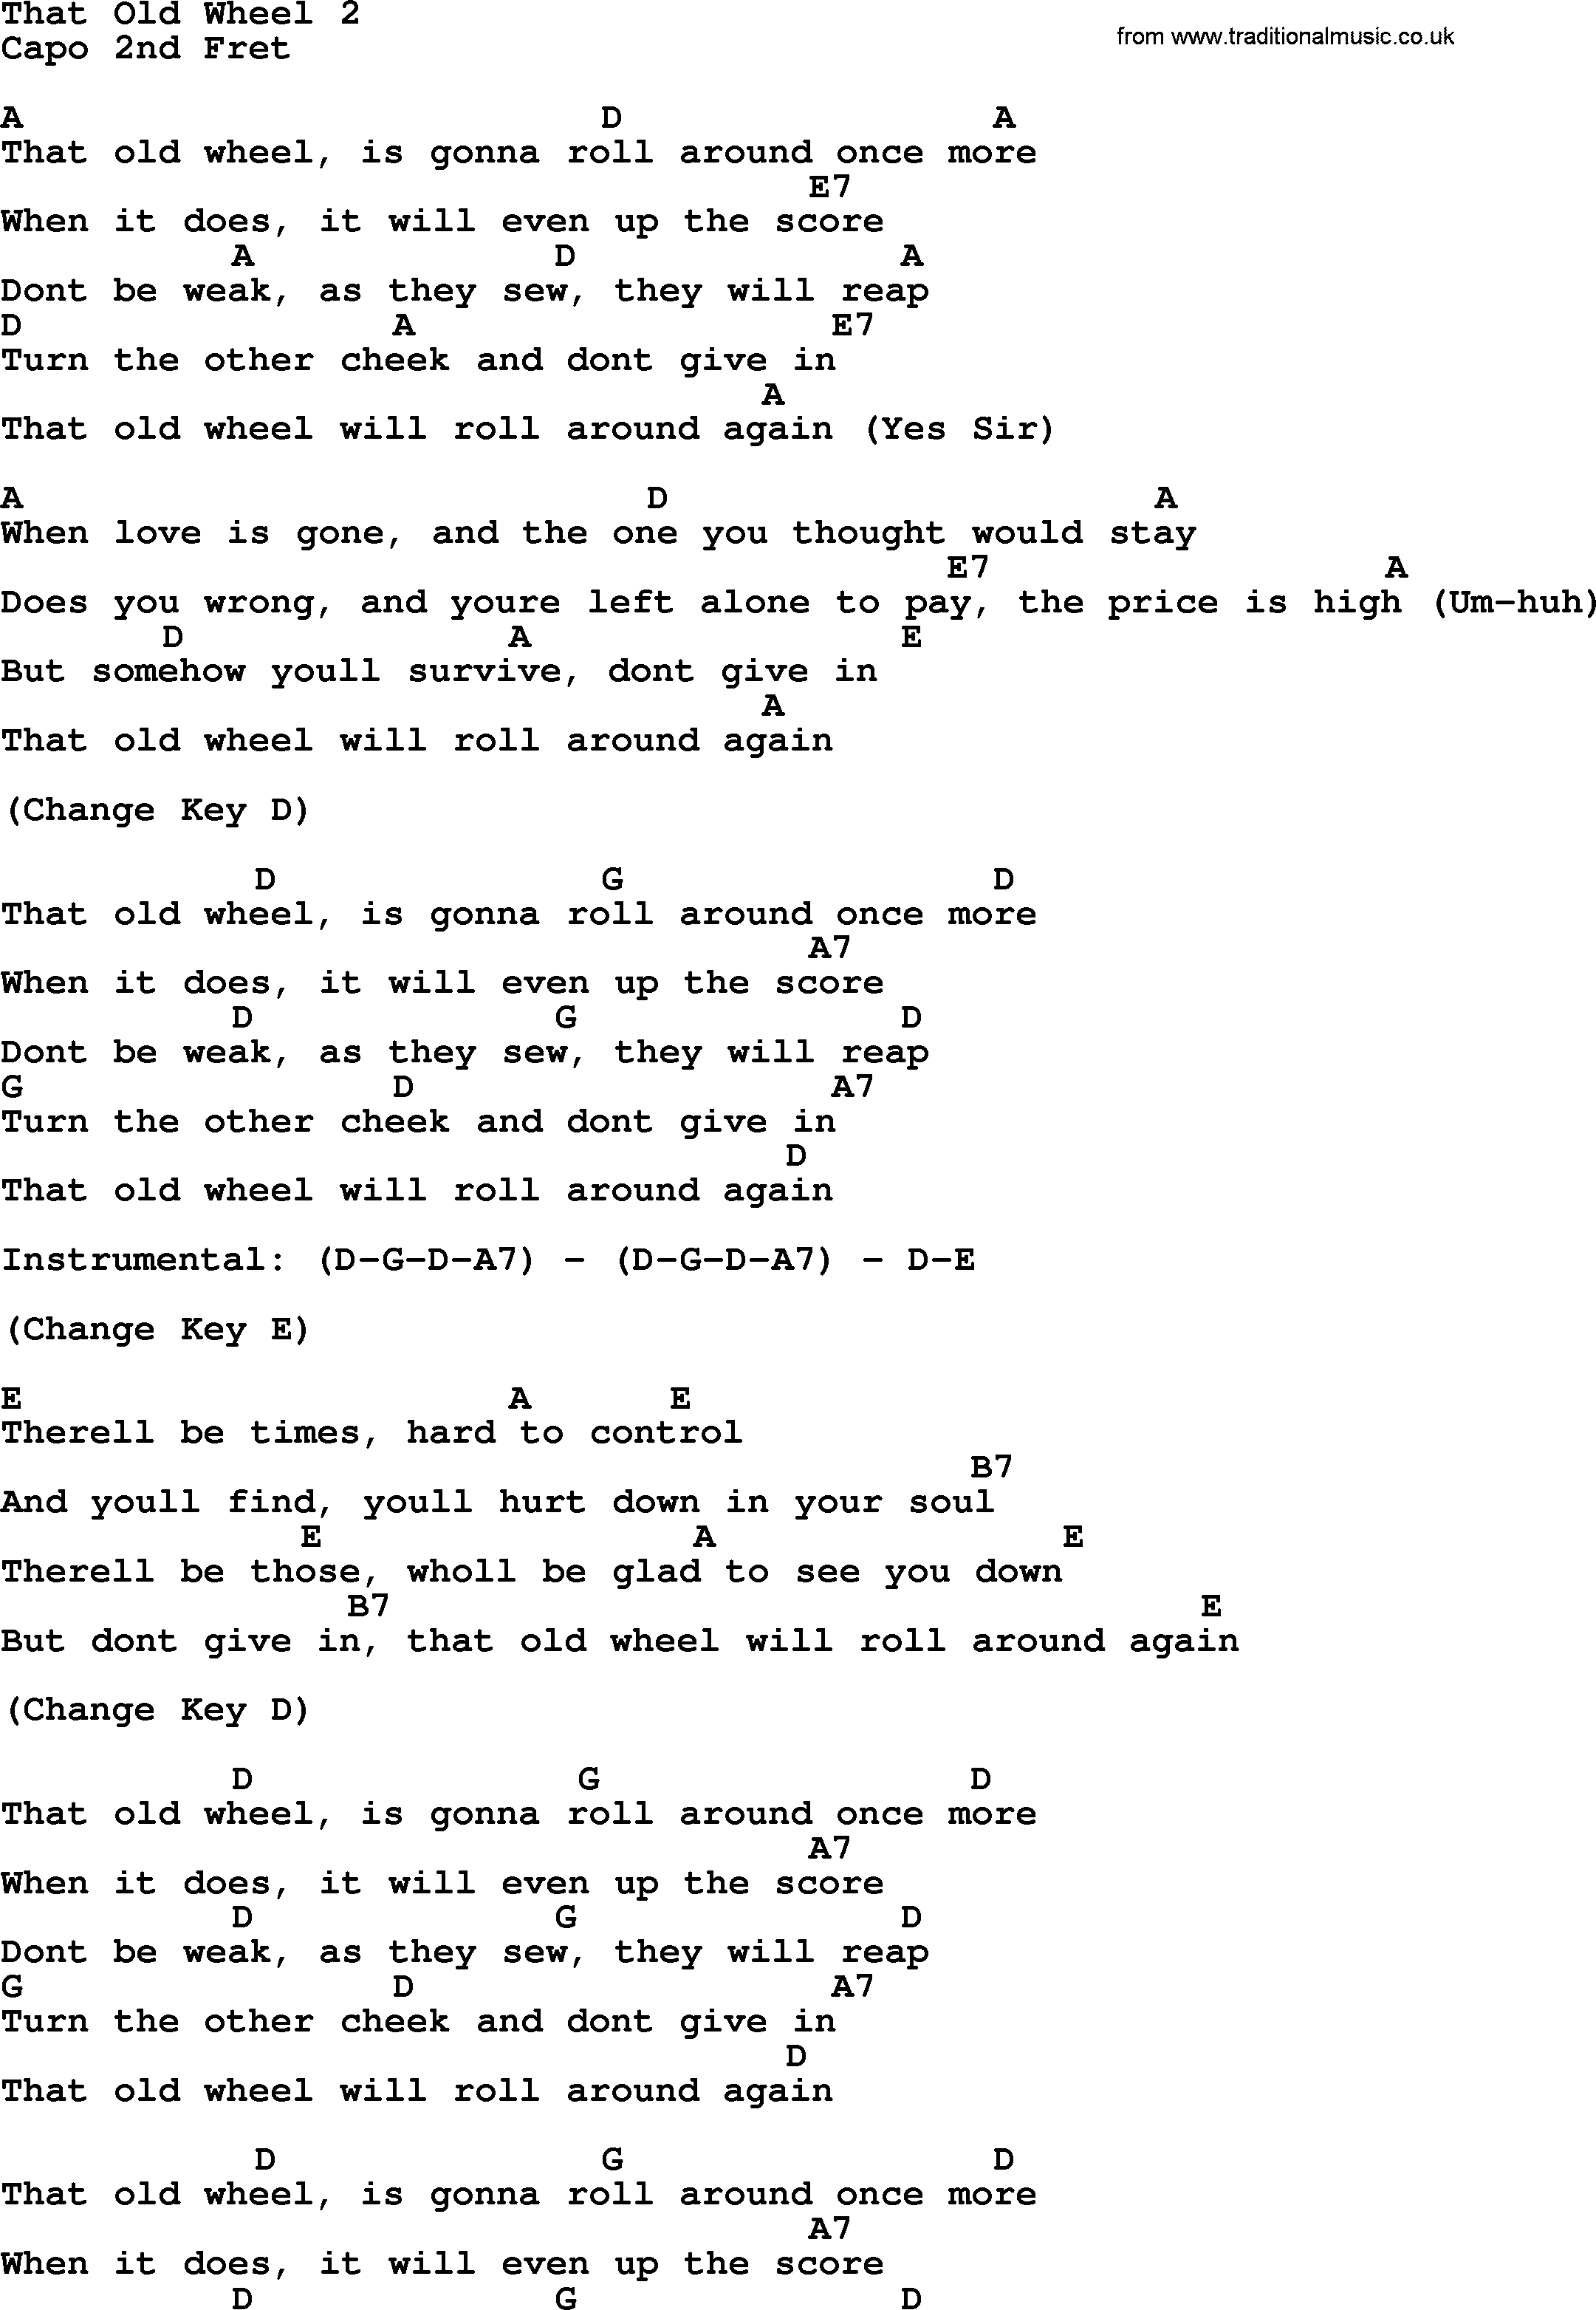 Johnny Cash song That Old Wheel 2, lyrics and chords